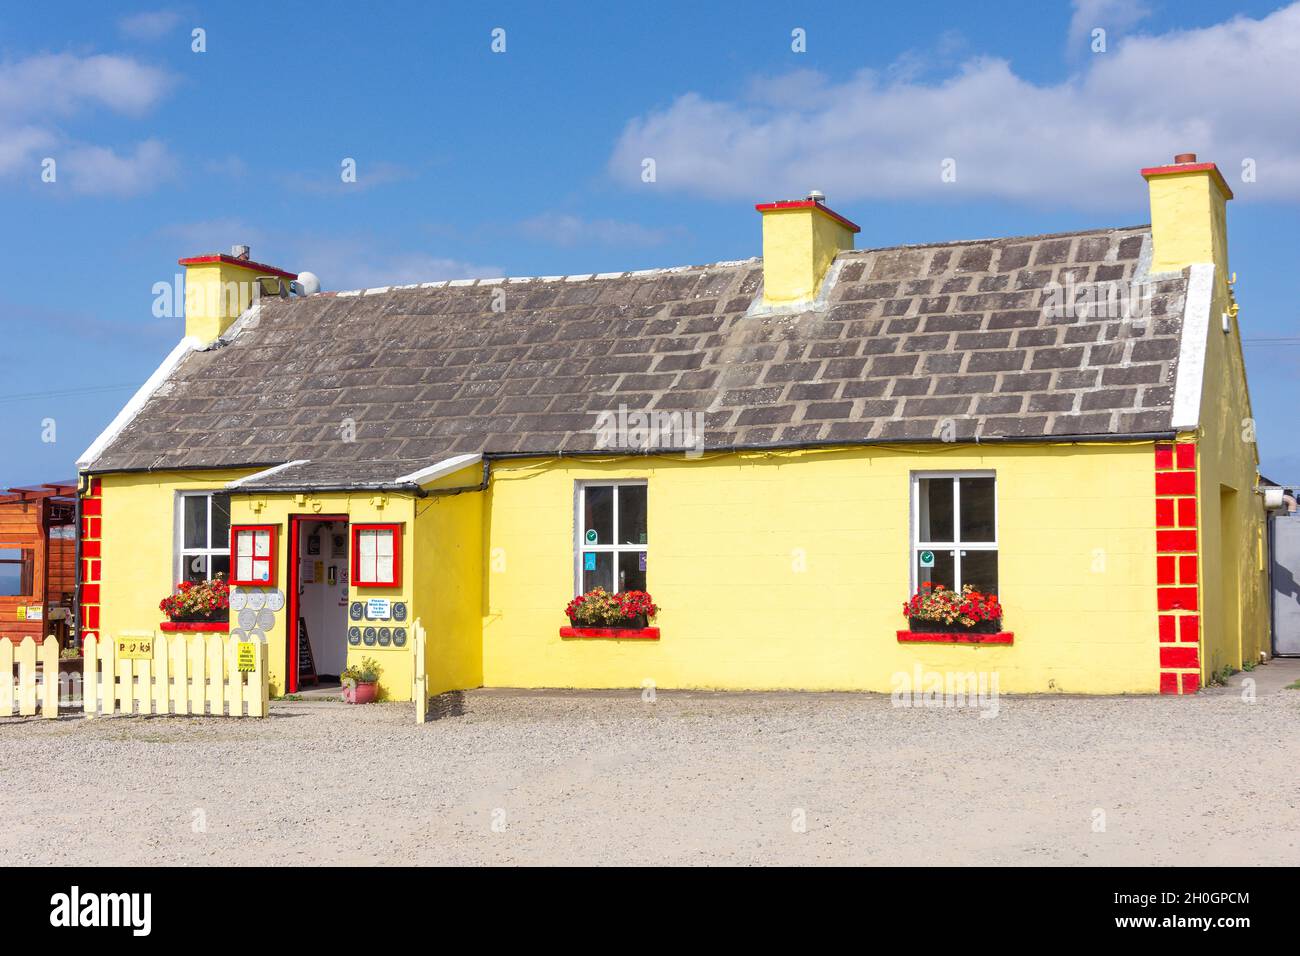 Stone Cutters family restaurant near Cliffs of Moher, County Clare, Republic of Ireland Stock Photo